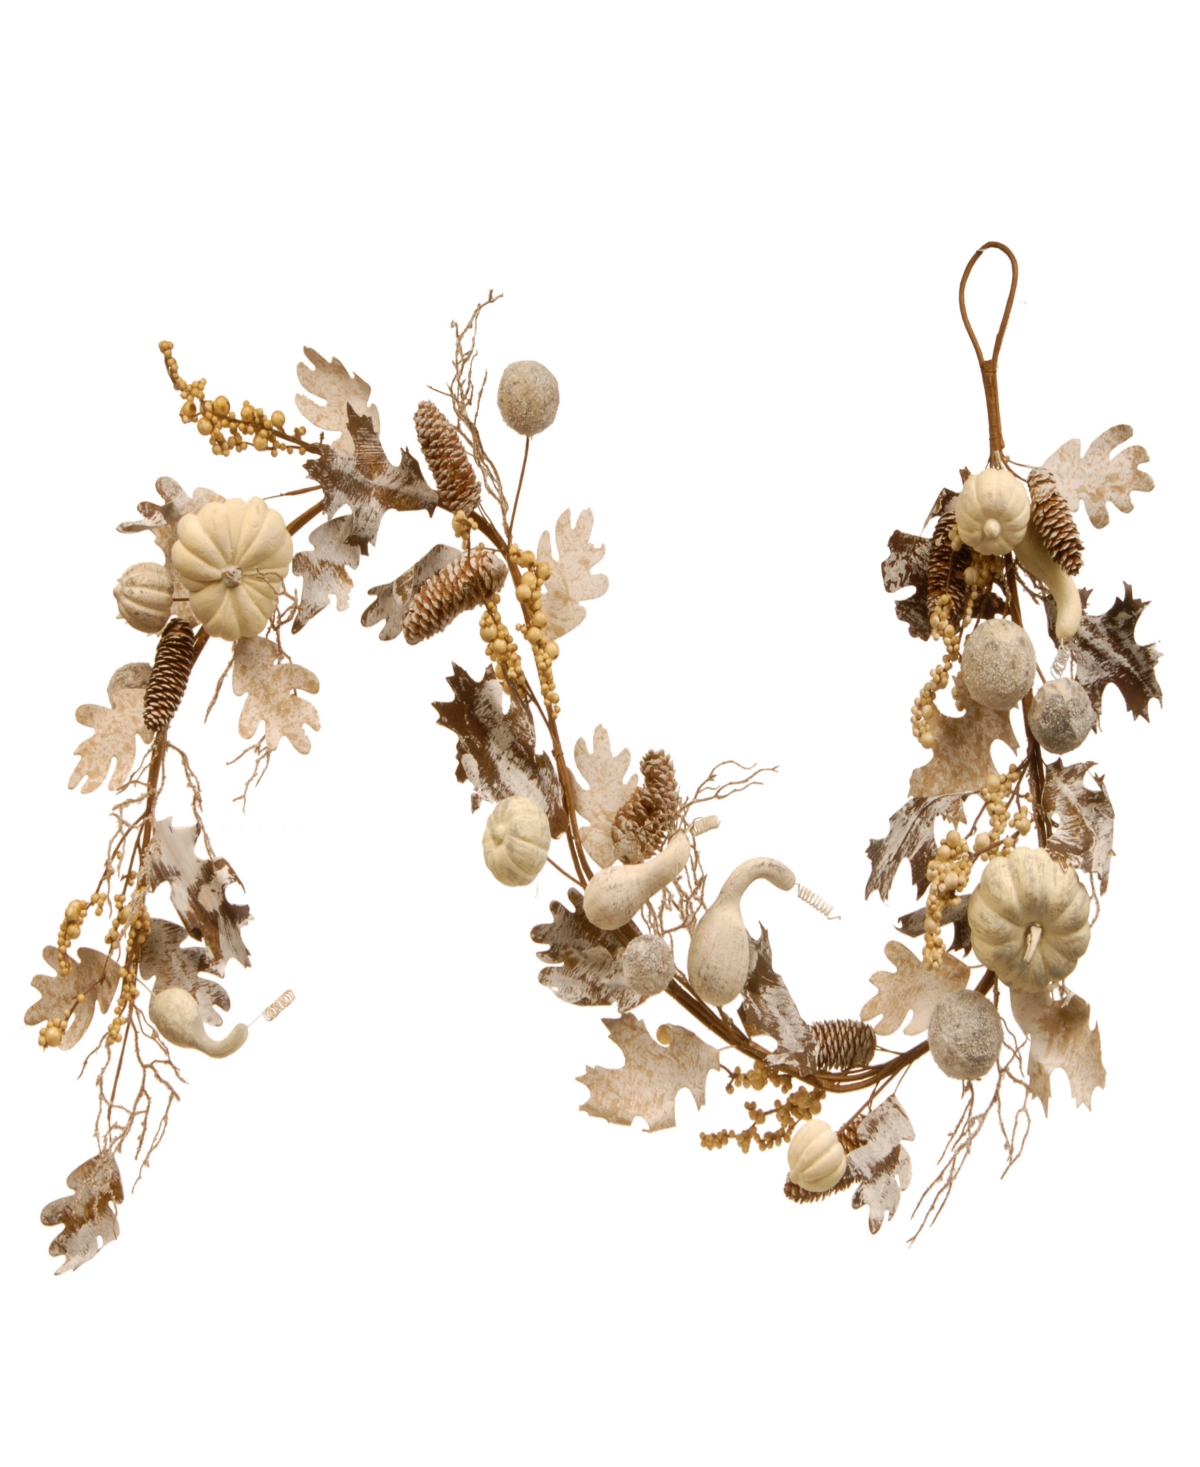 Shop National Tree Company 6' Artificial Autumn Garland, White, Made With Pumpkins, Gourds, Maple Leaves, Pinecones, Berry Clus